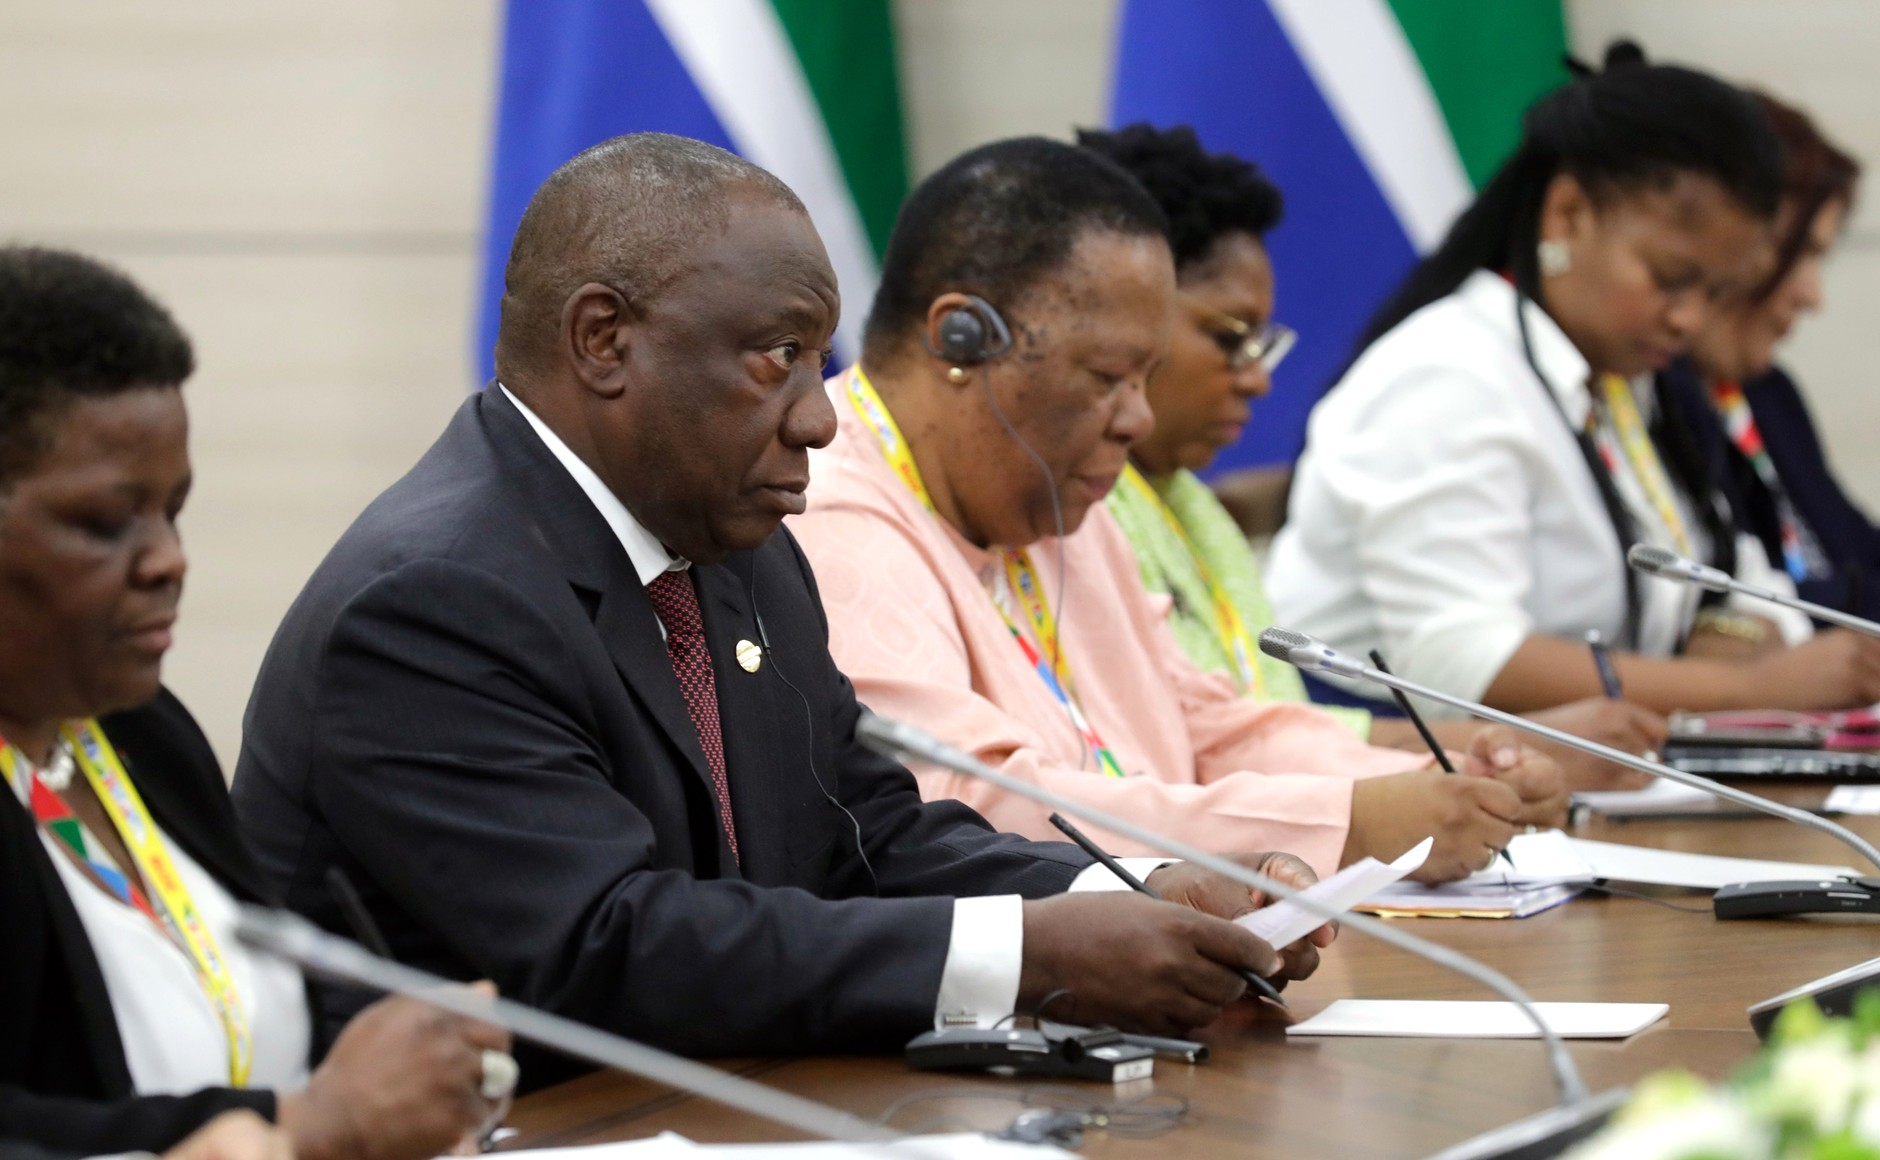 Meeting with President of South Africa Cyril Ramaphosa • President of Russia